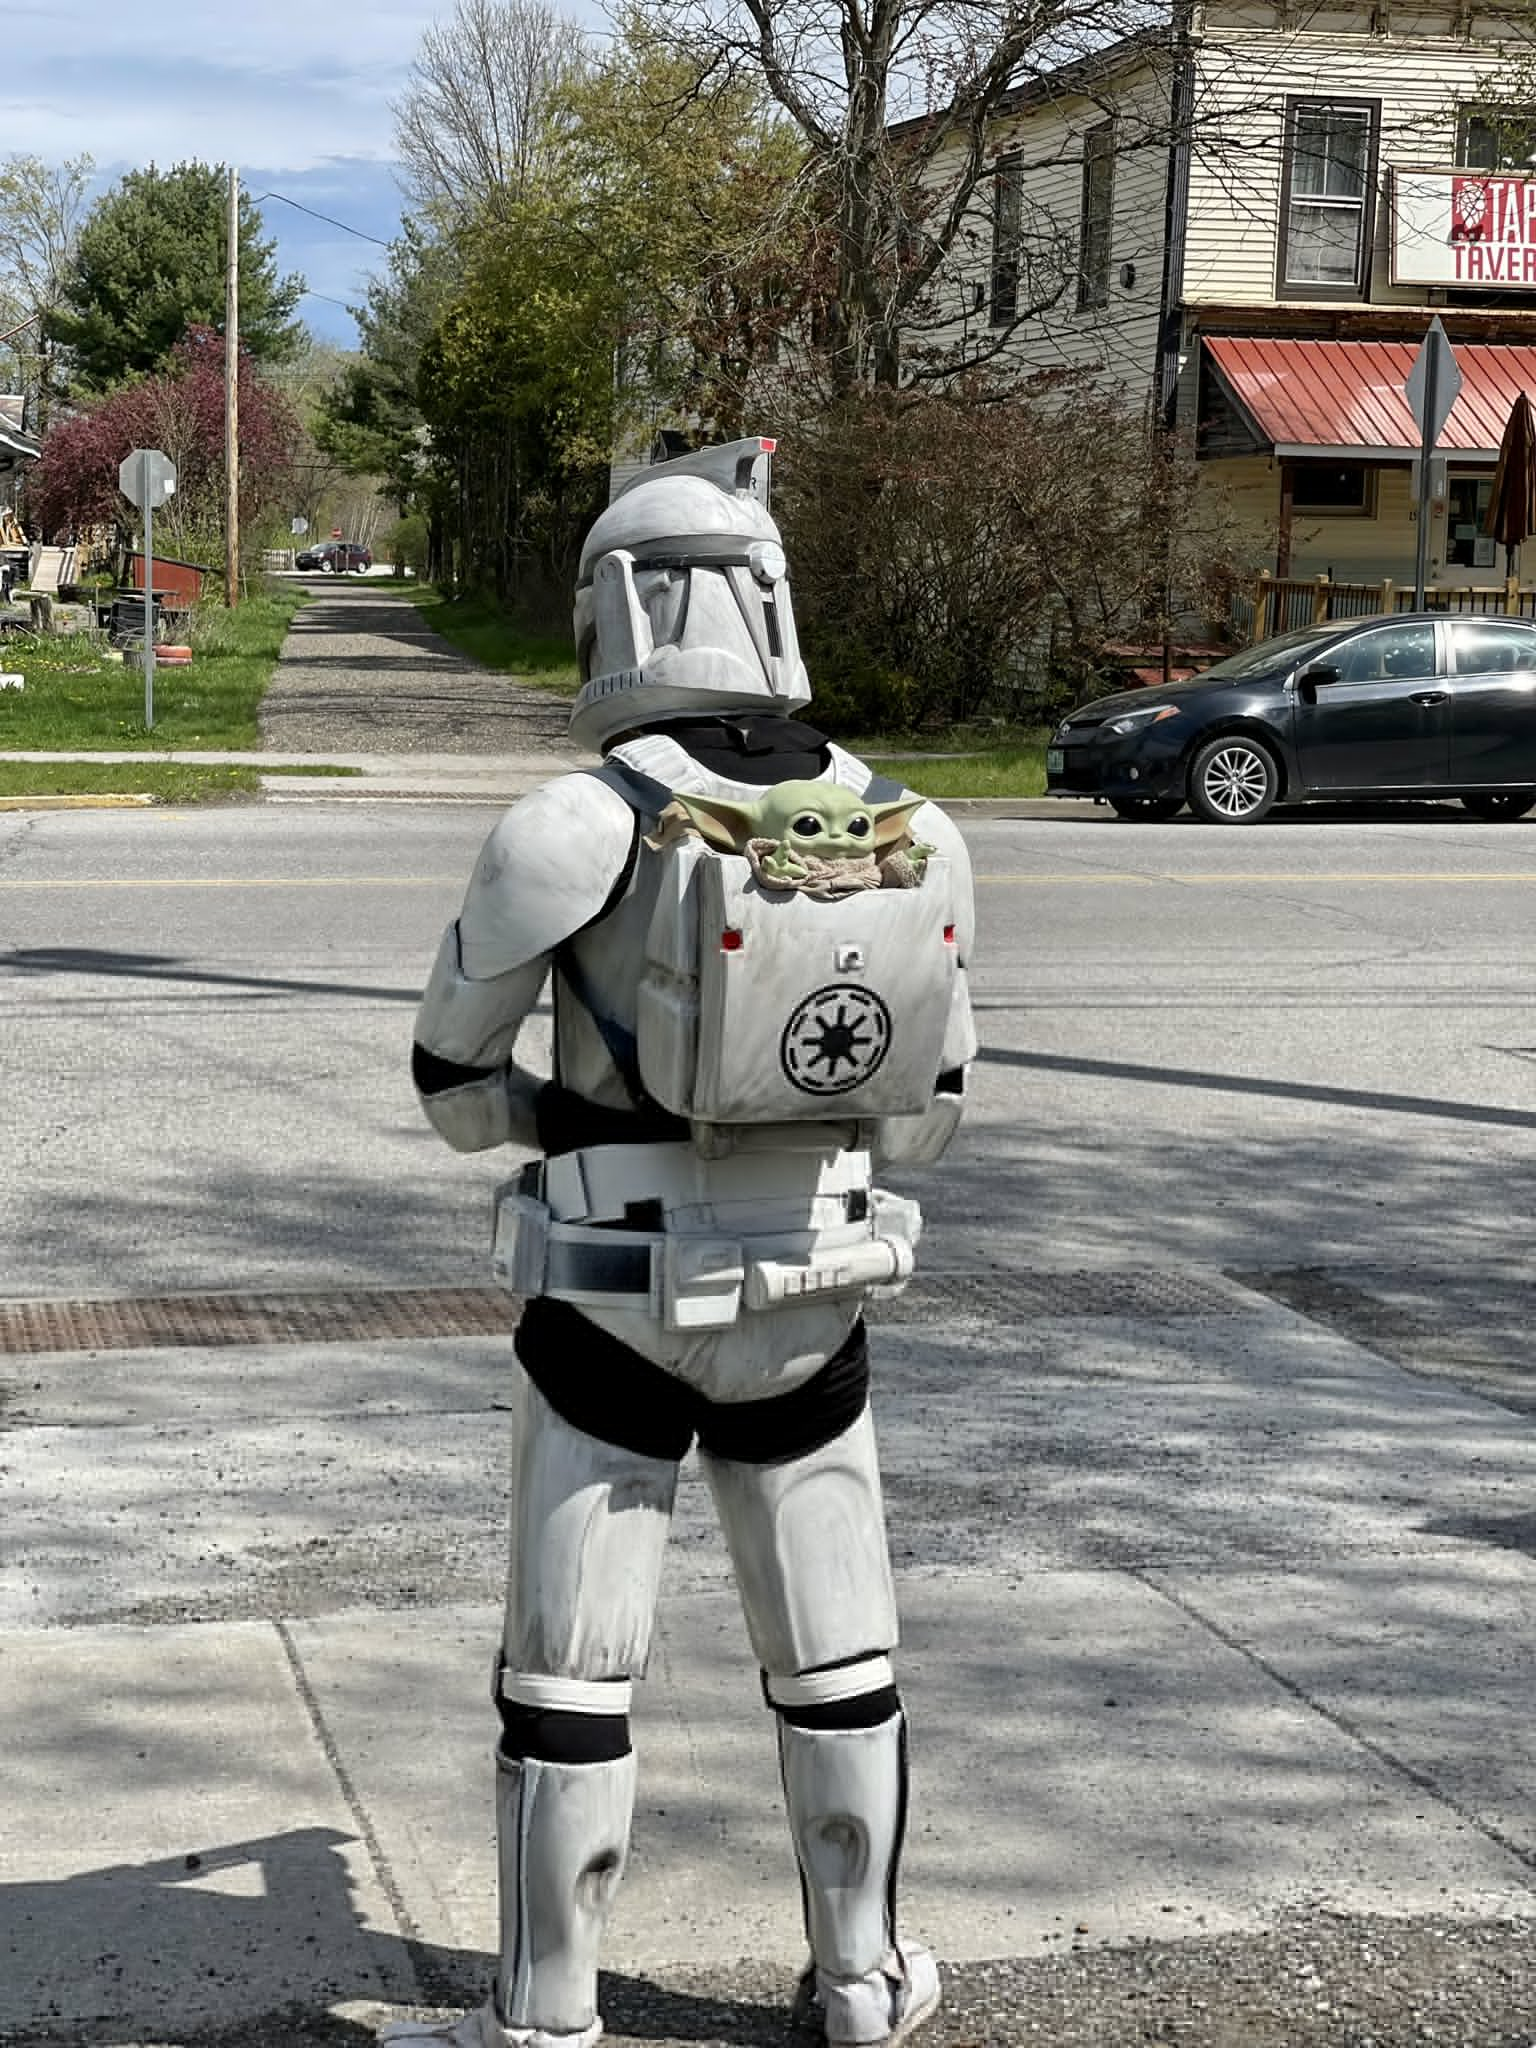 Picture: An AOTC Clone trooper facing away from the camera. A Baby Yoda is seated in the backpack.